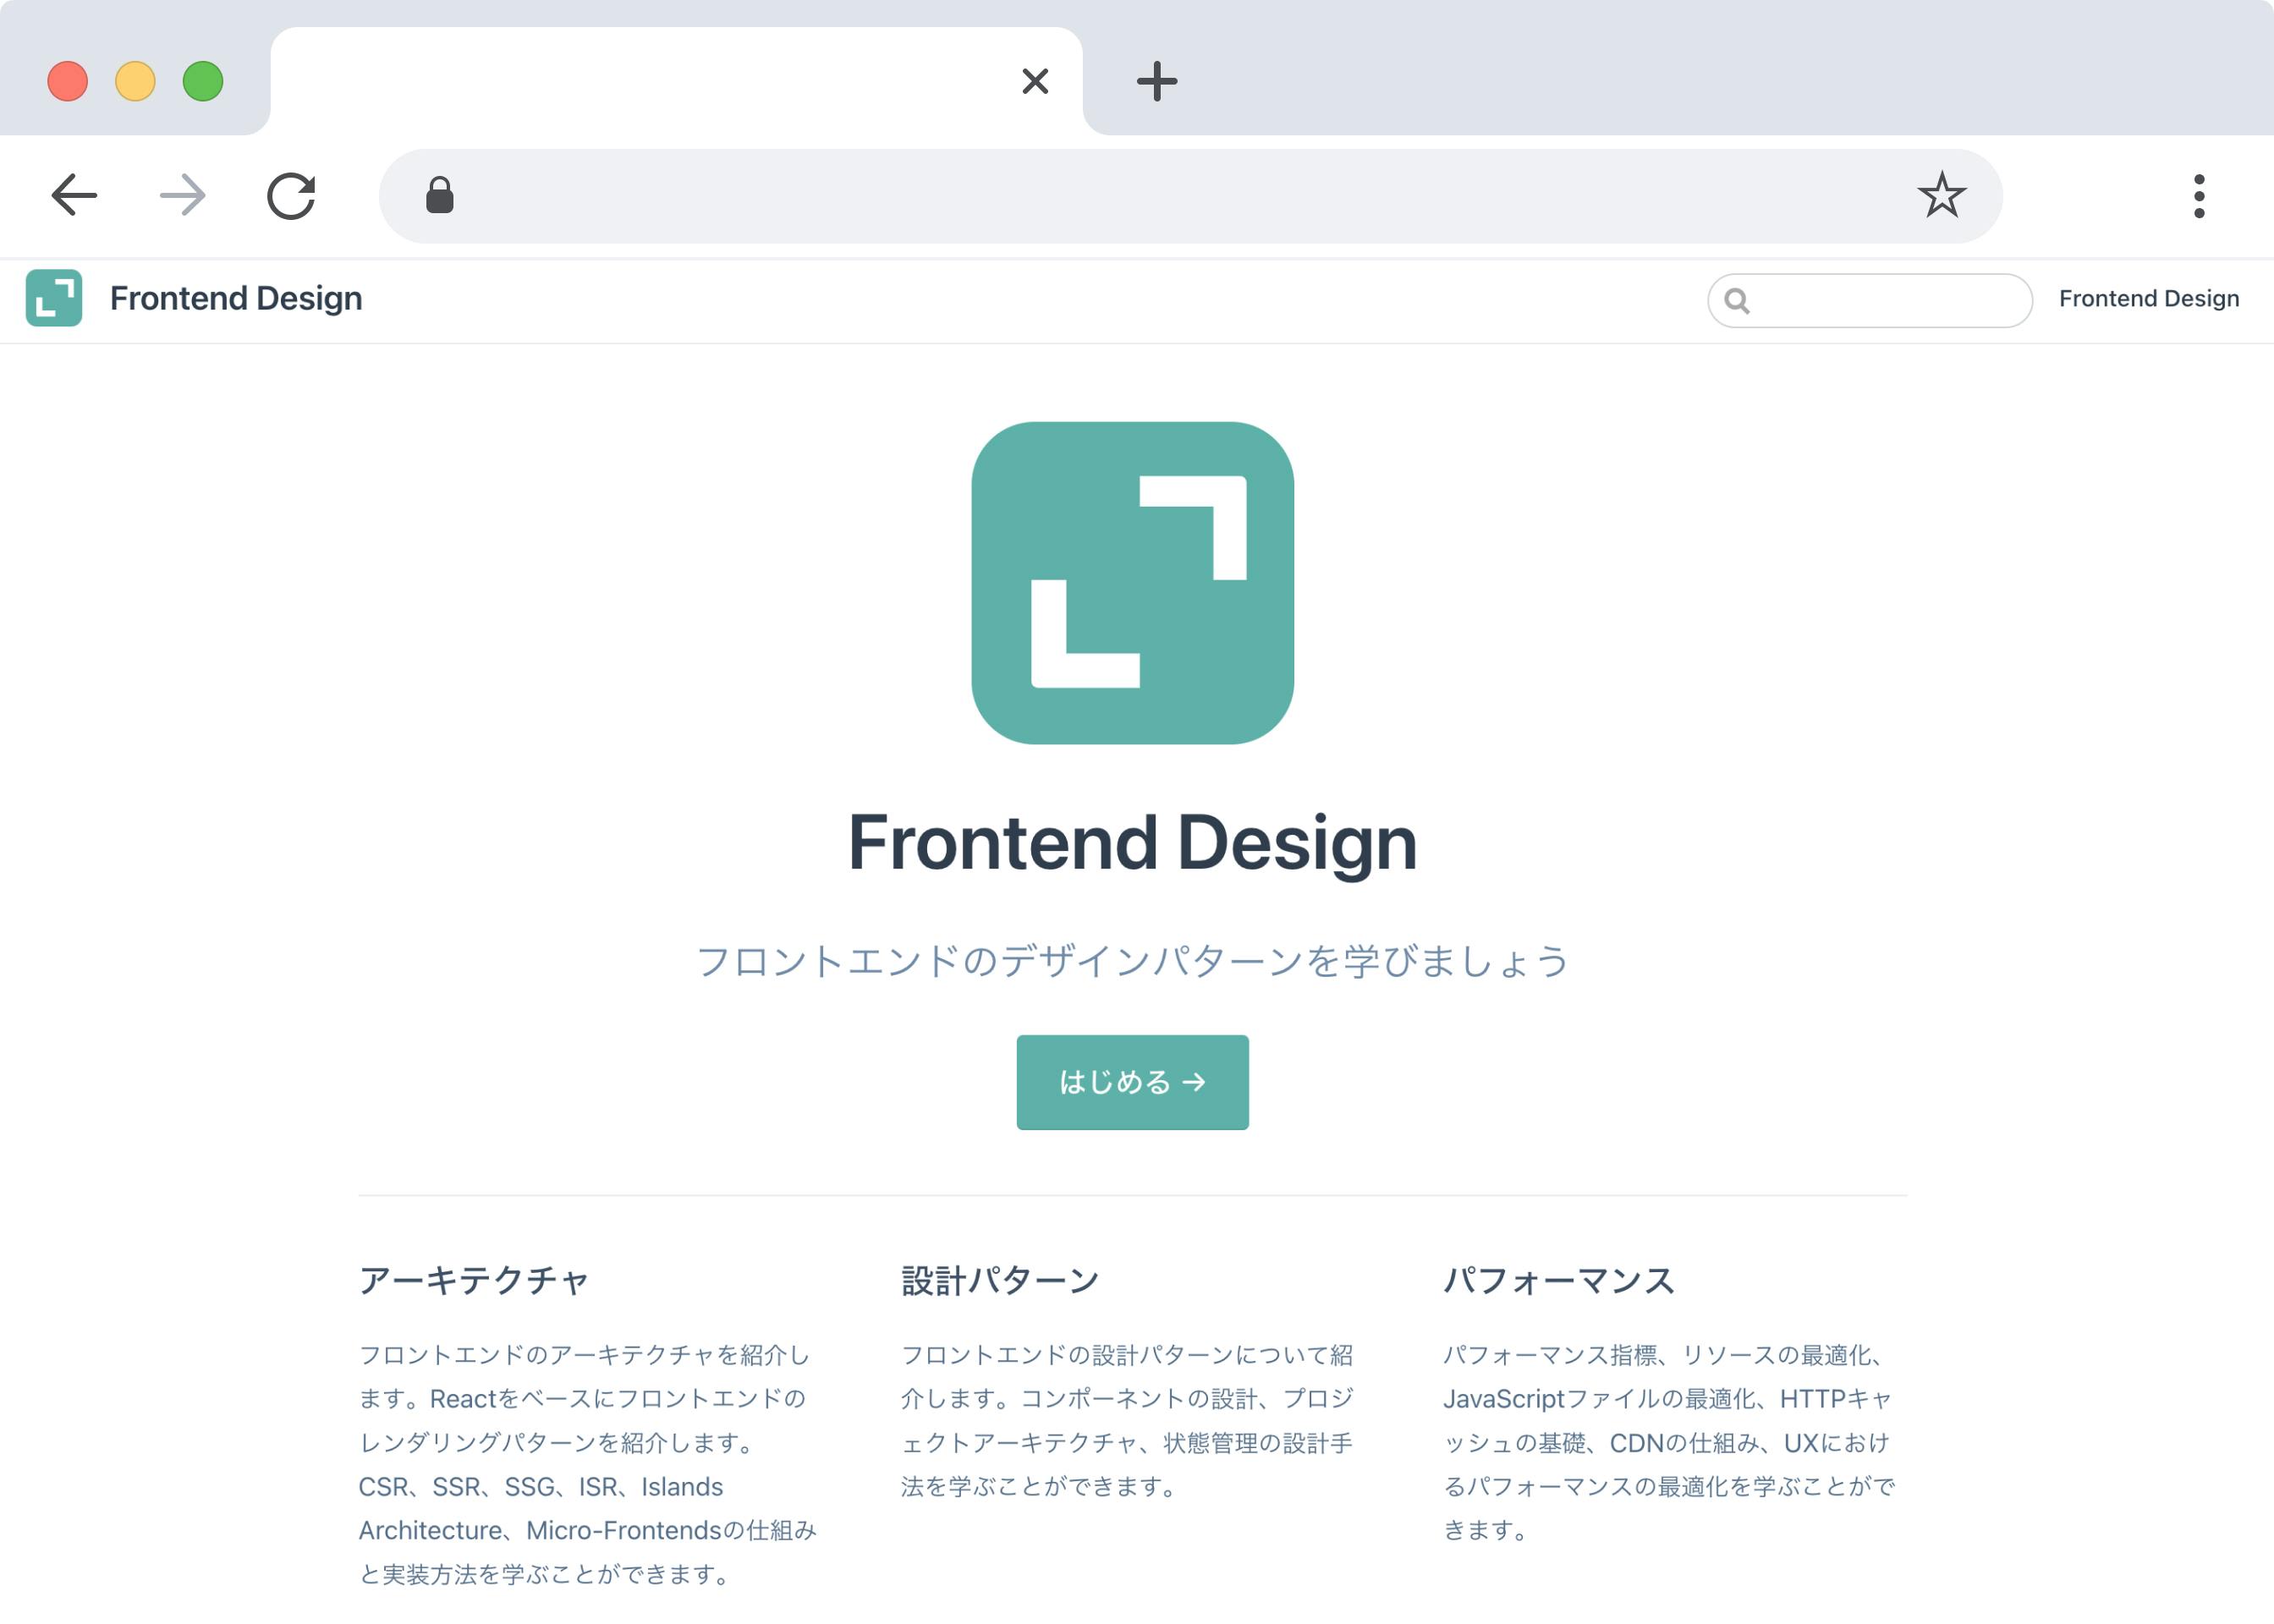 A image of Frontend Design